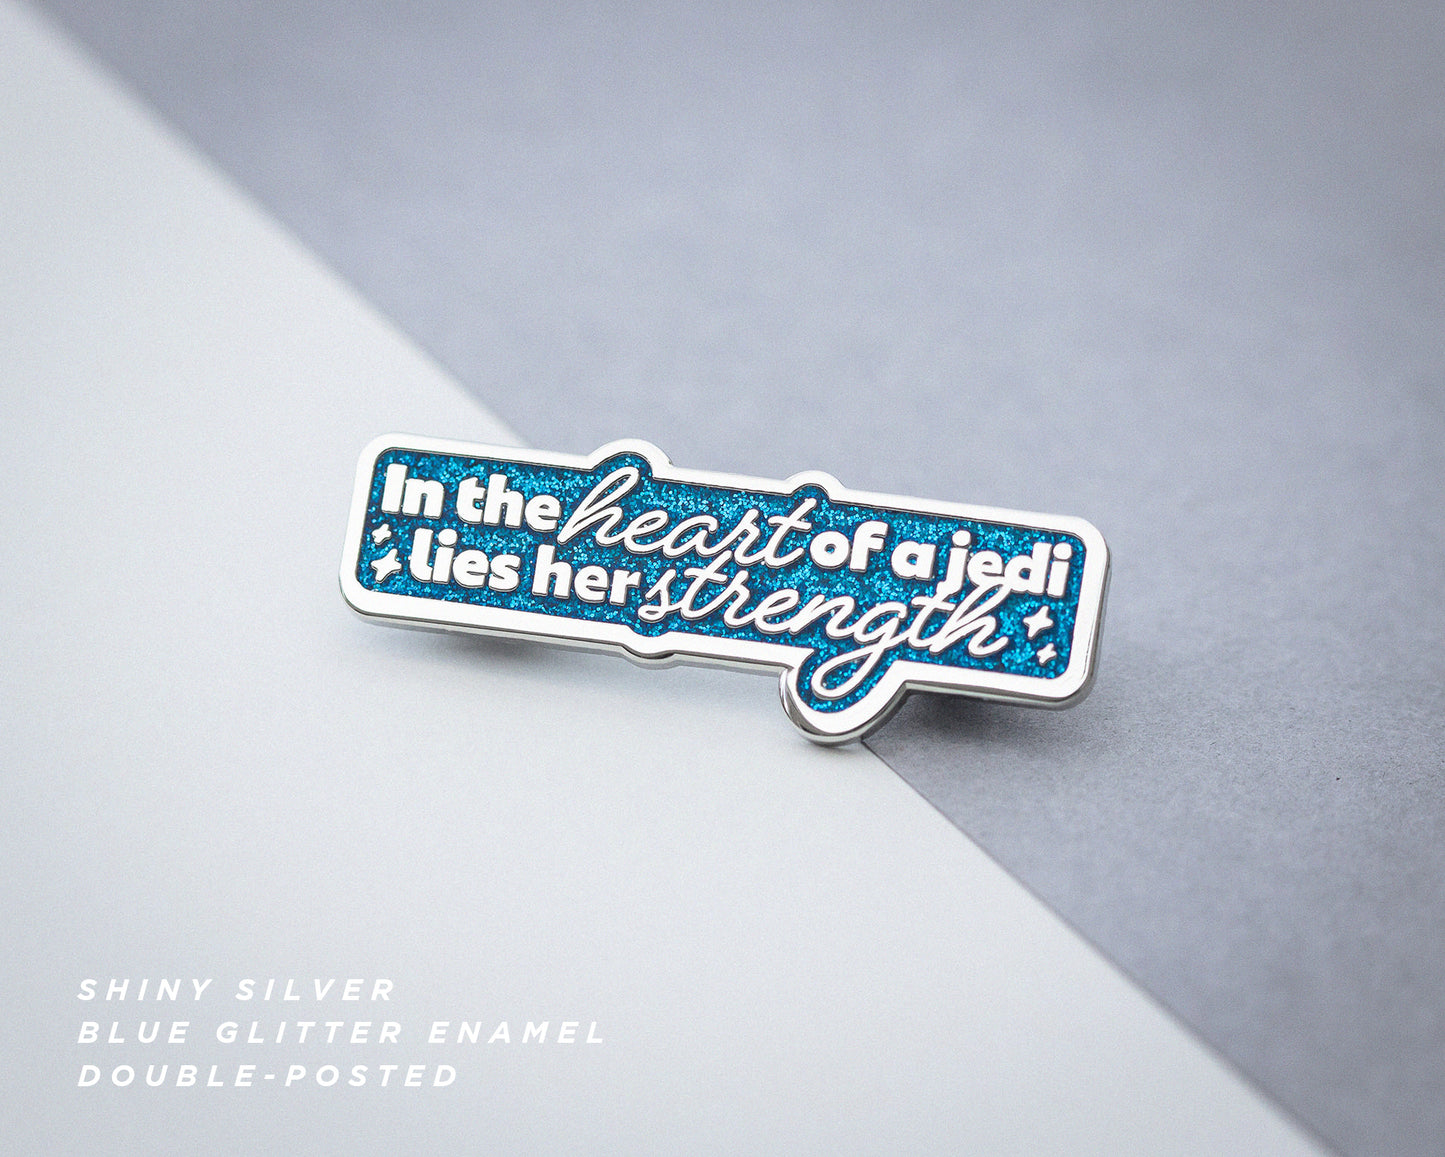 Jedi Strength ✧ Quote Pin